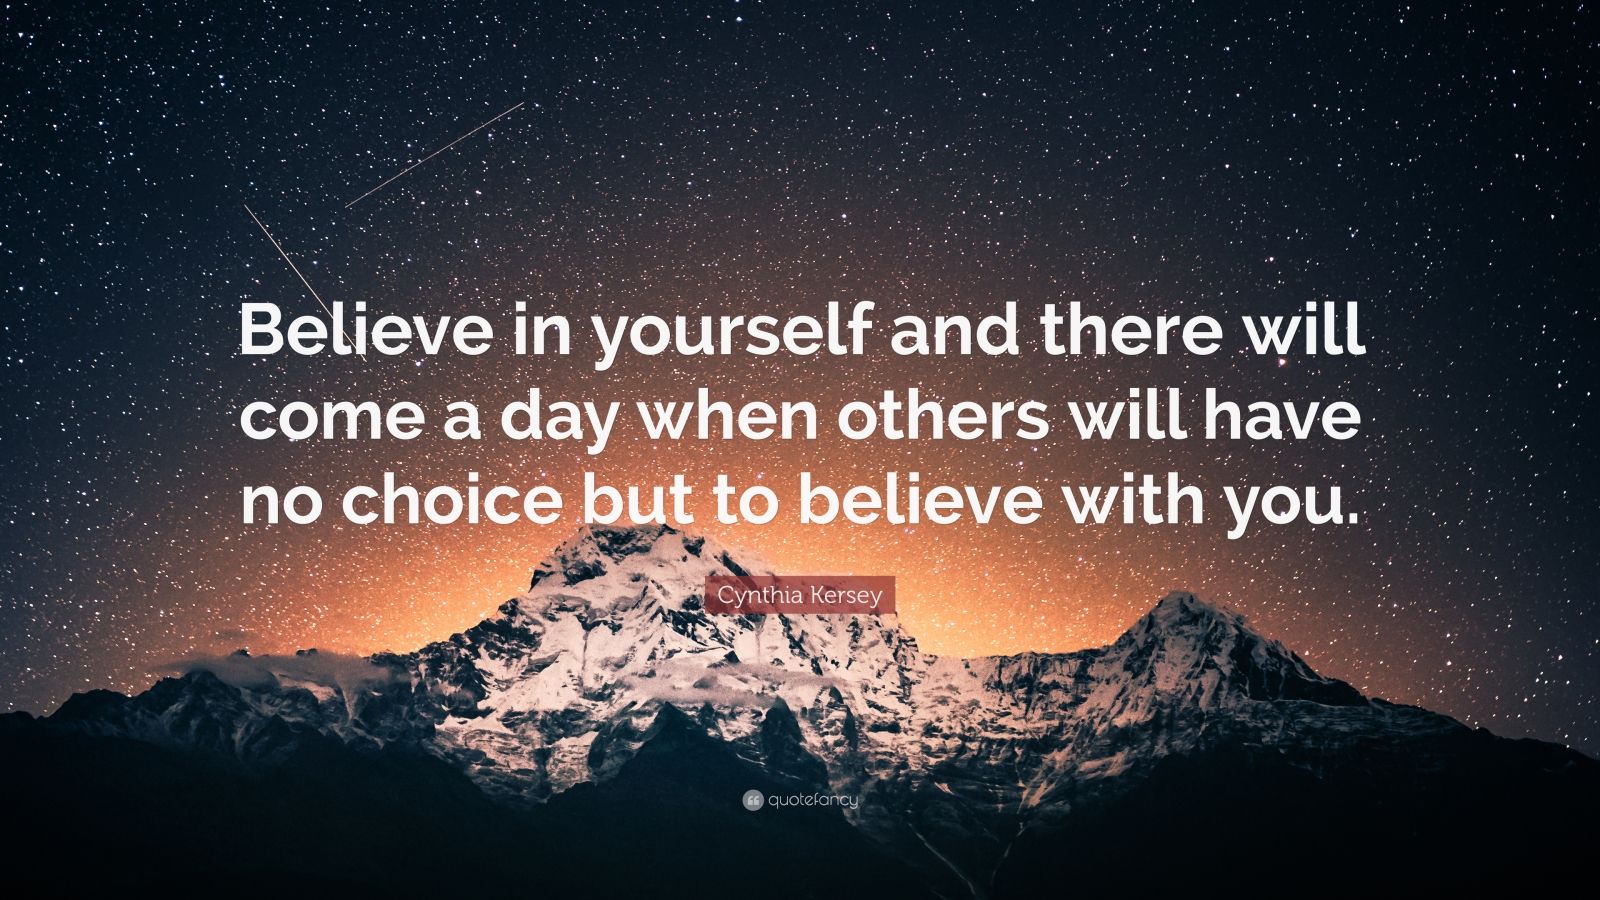 Cynthia Kersey Quote: “Believe in yourself and there will come a day ...